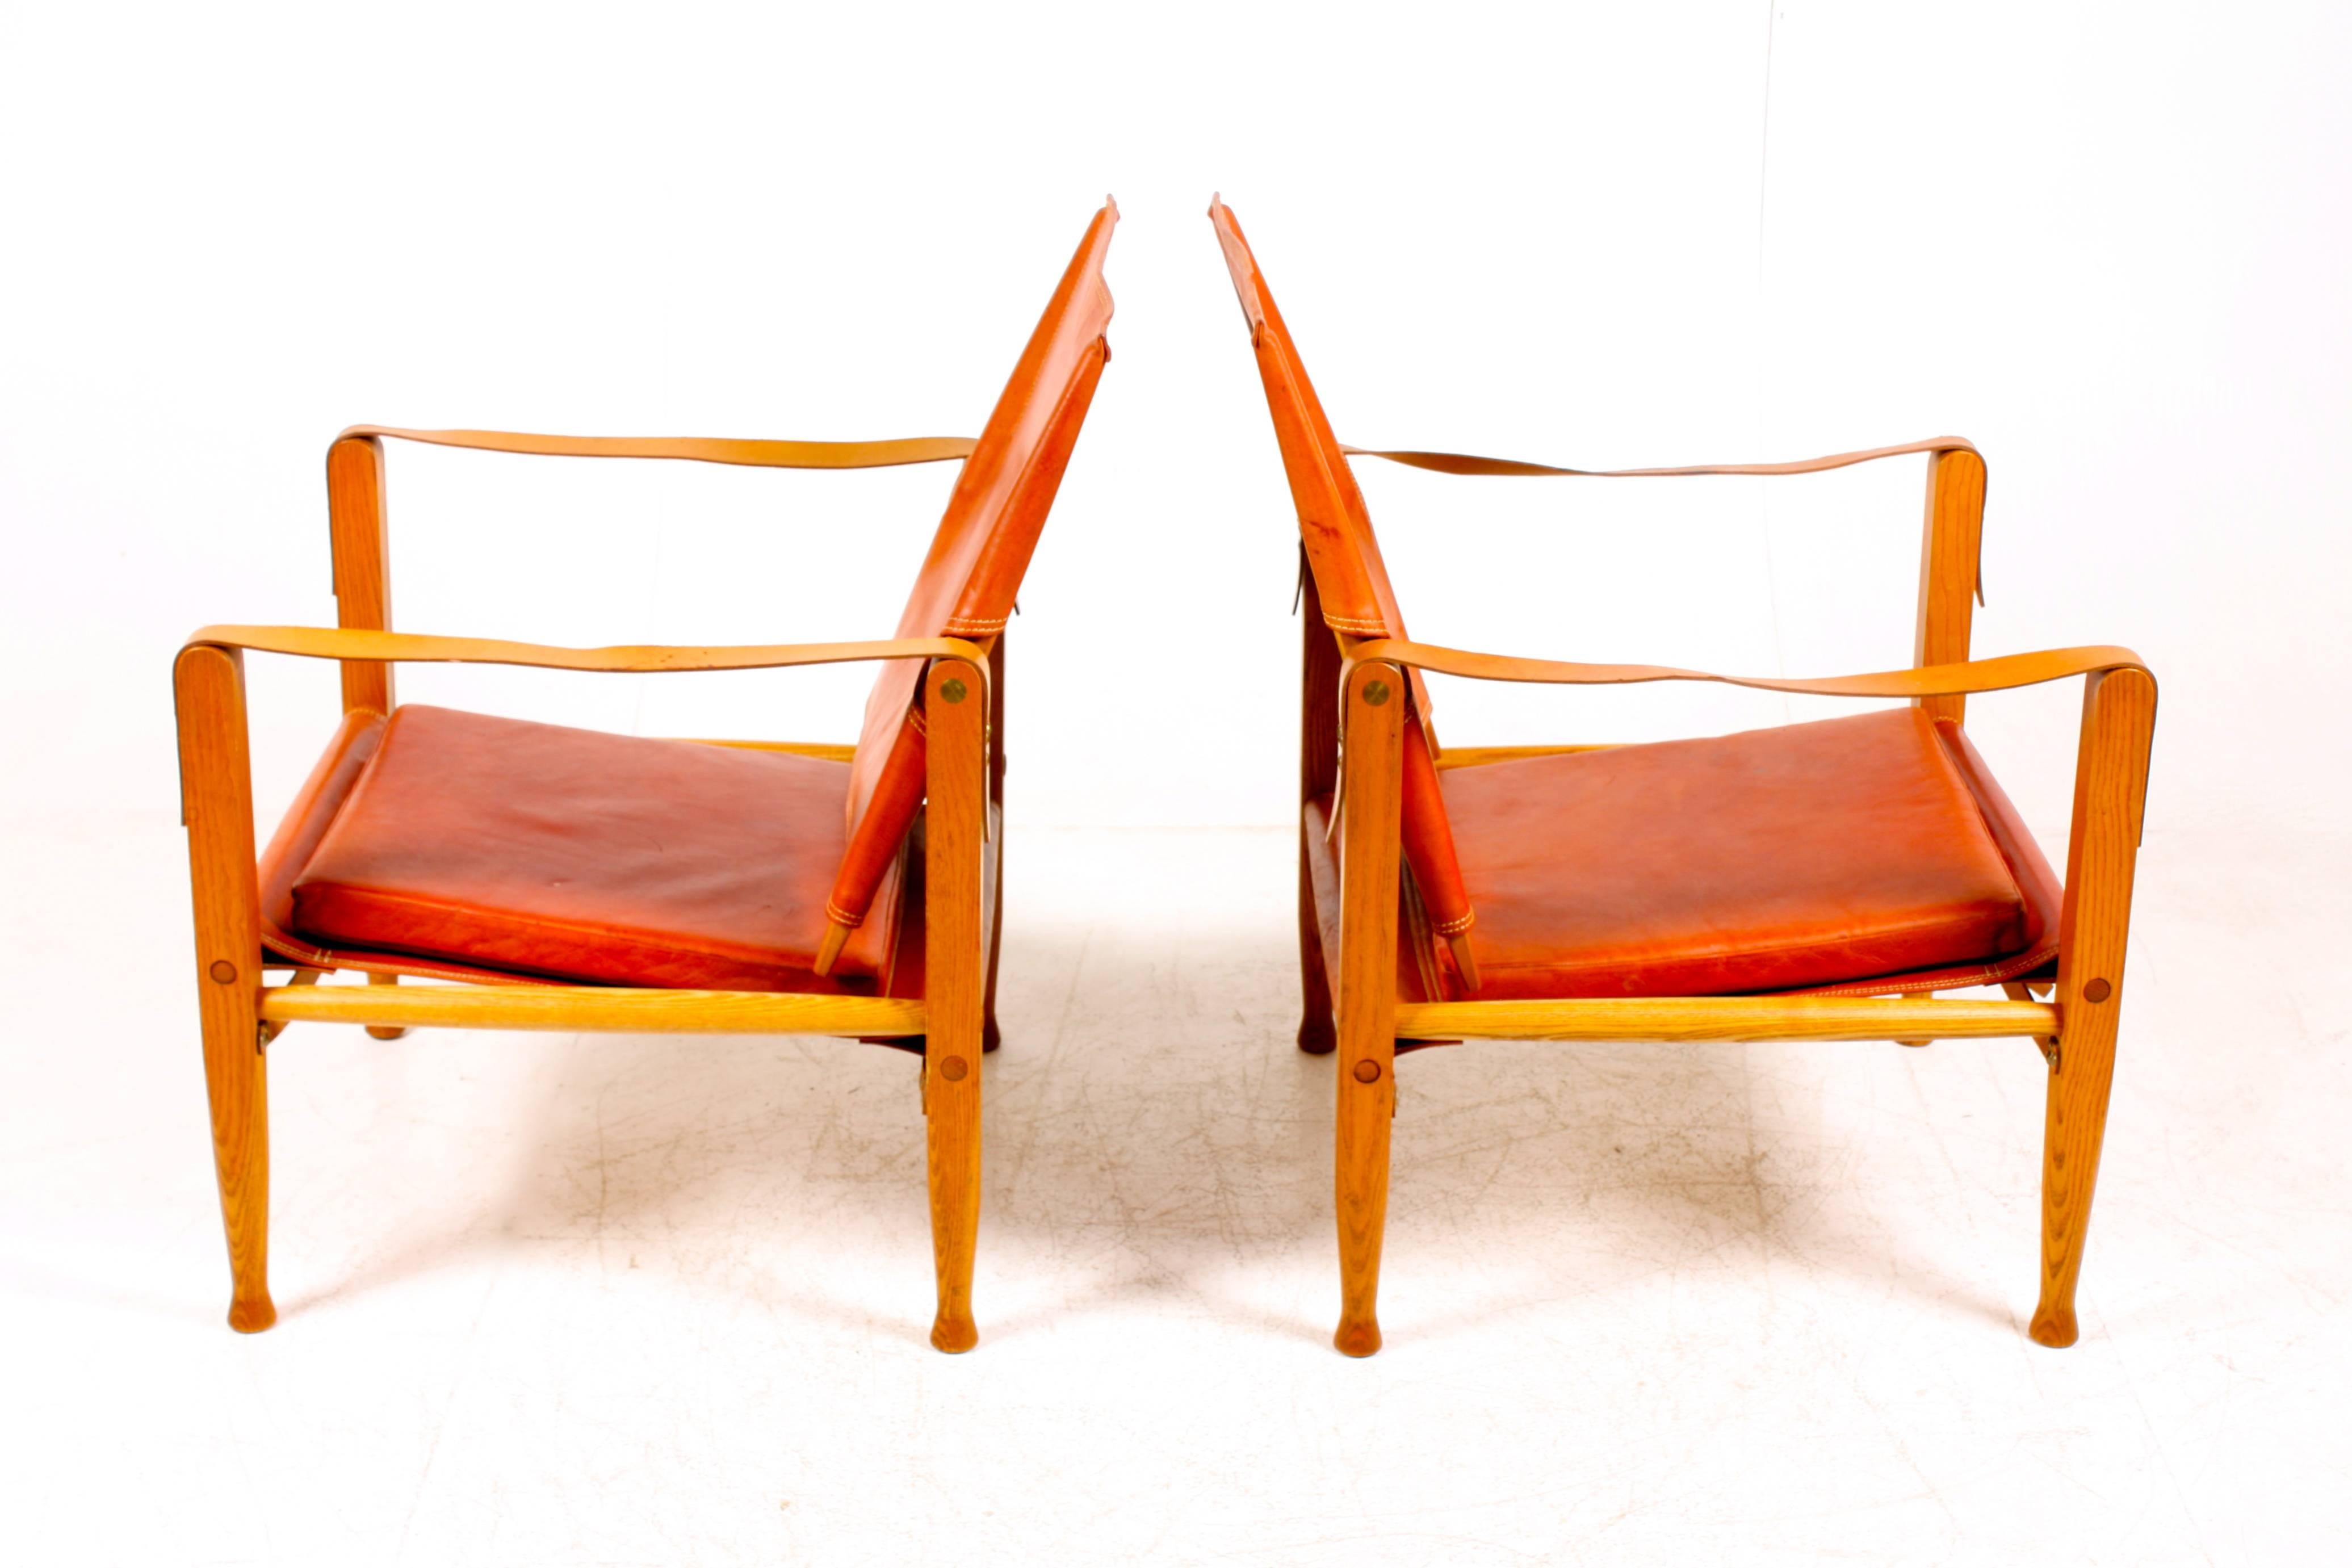 Pair of great looking Safari chairs in Elm and patinated leather - Designed by Kaare Klint in 1933. Made by Rudolf Rasmusen cabinet makers - All original condition.